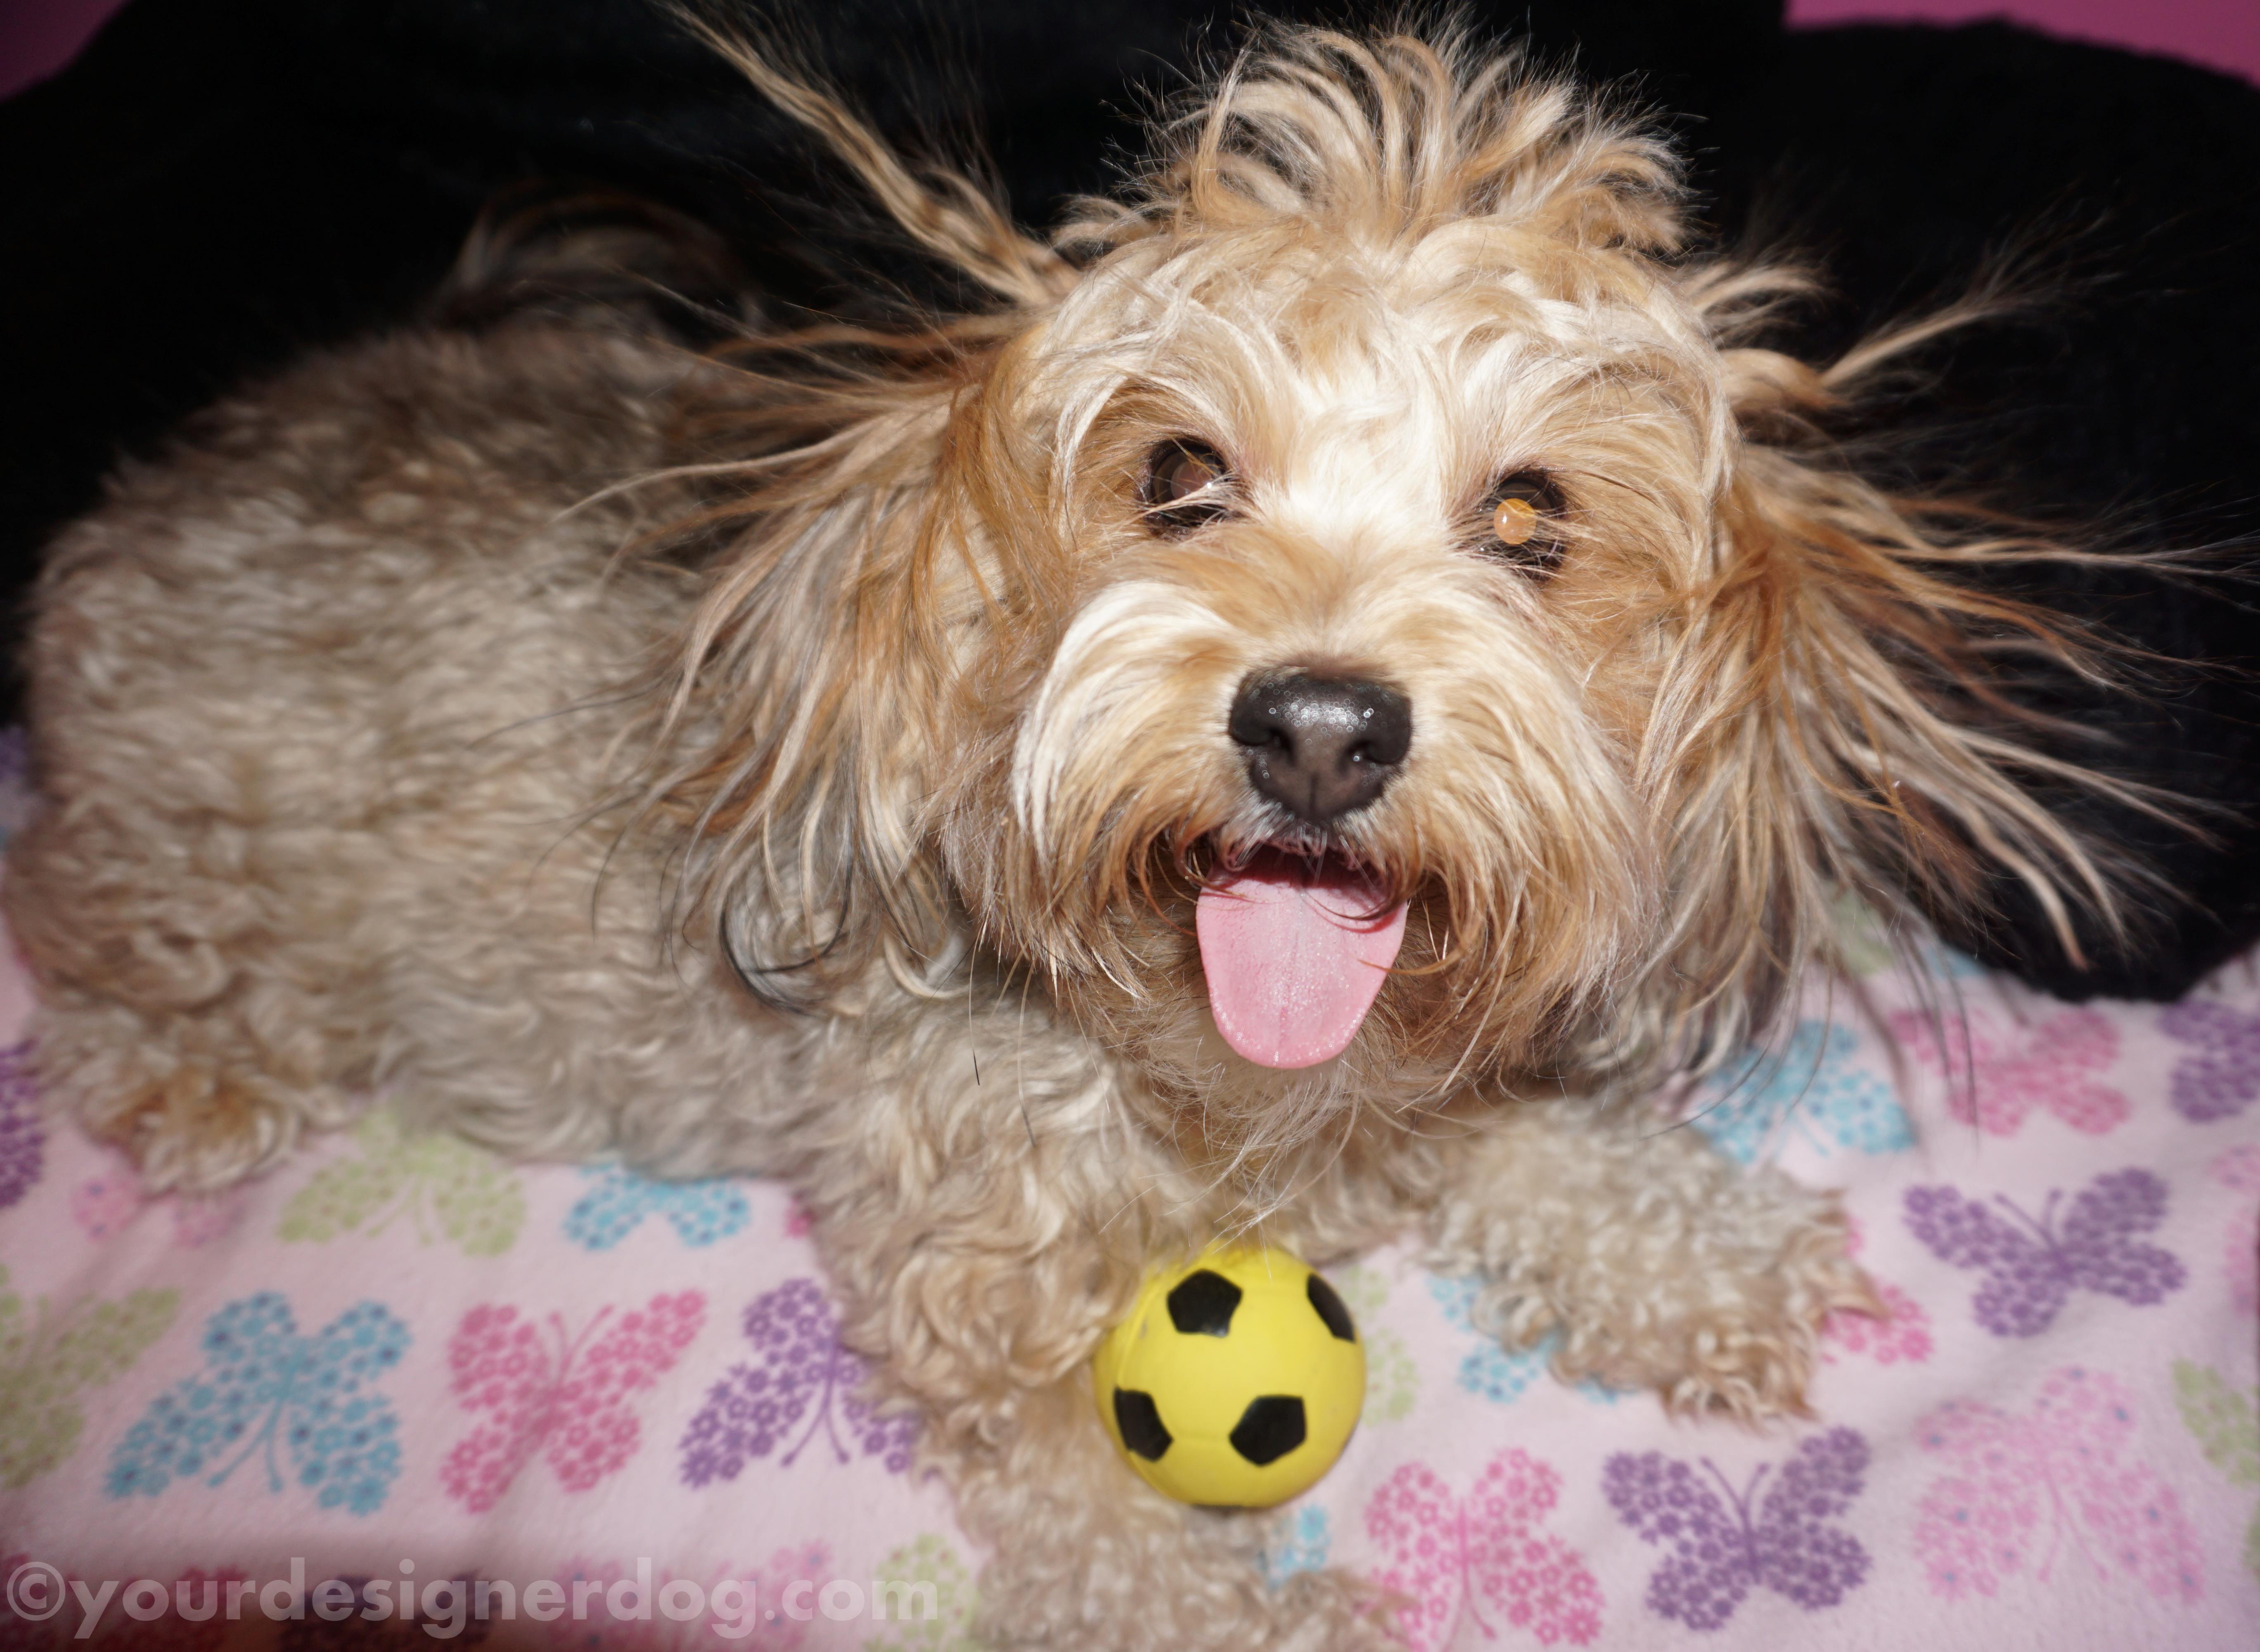 dogs, designer dogs, yorkipoo, yorkie poo, bad hair day, dog smiling, tongue out